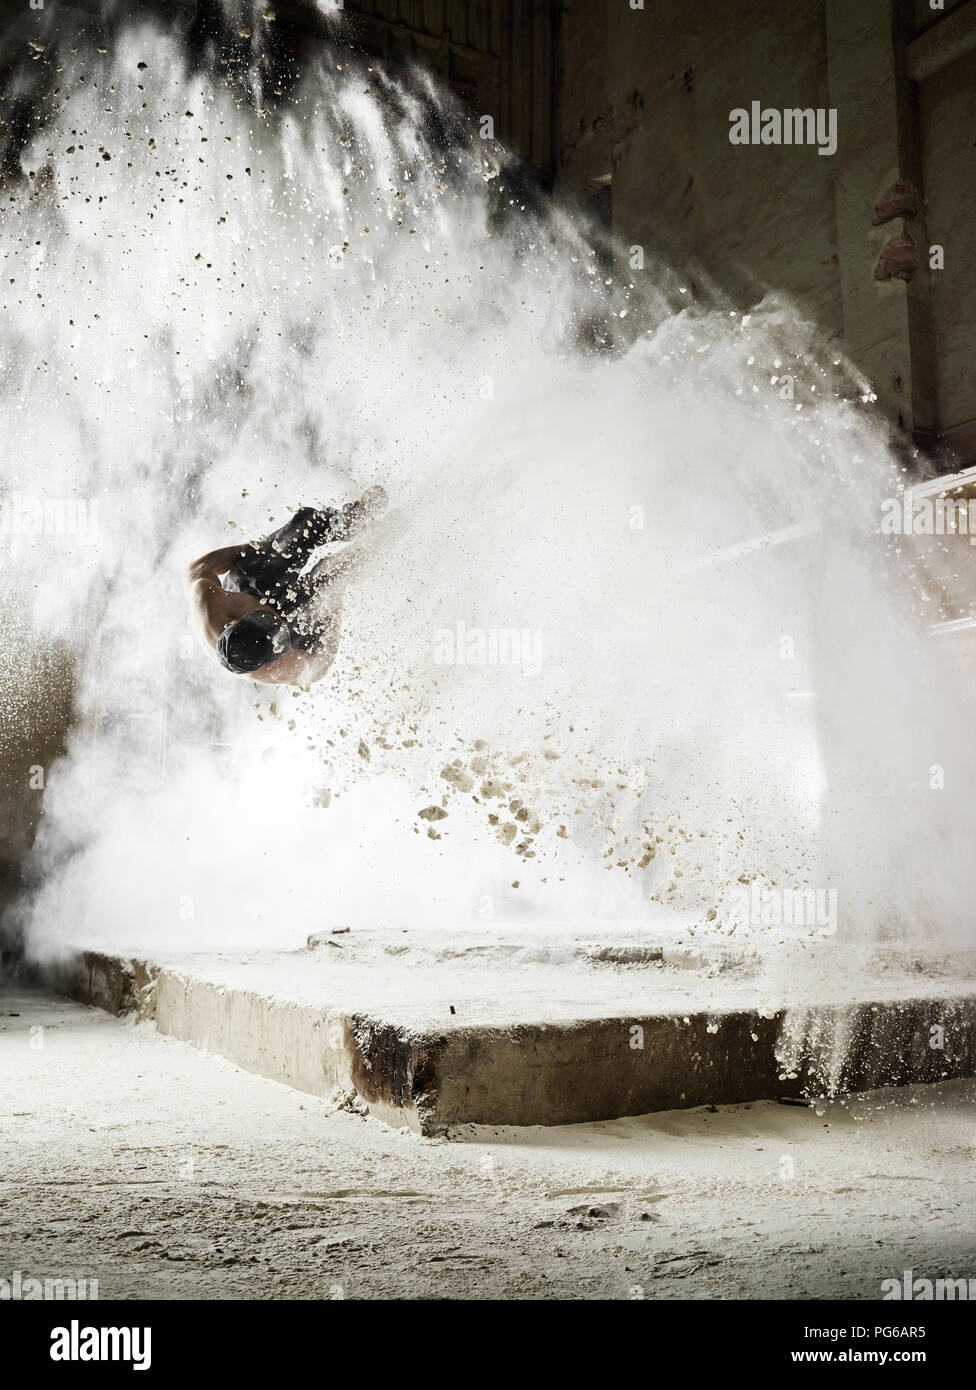 Man jumping in flour dust cloud during freerunning exercise Stock Photo